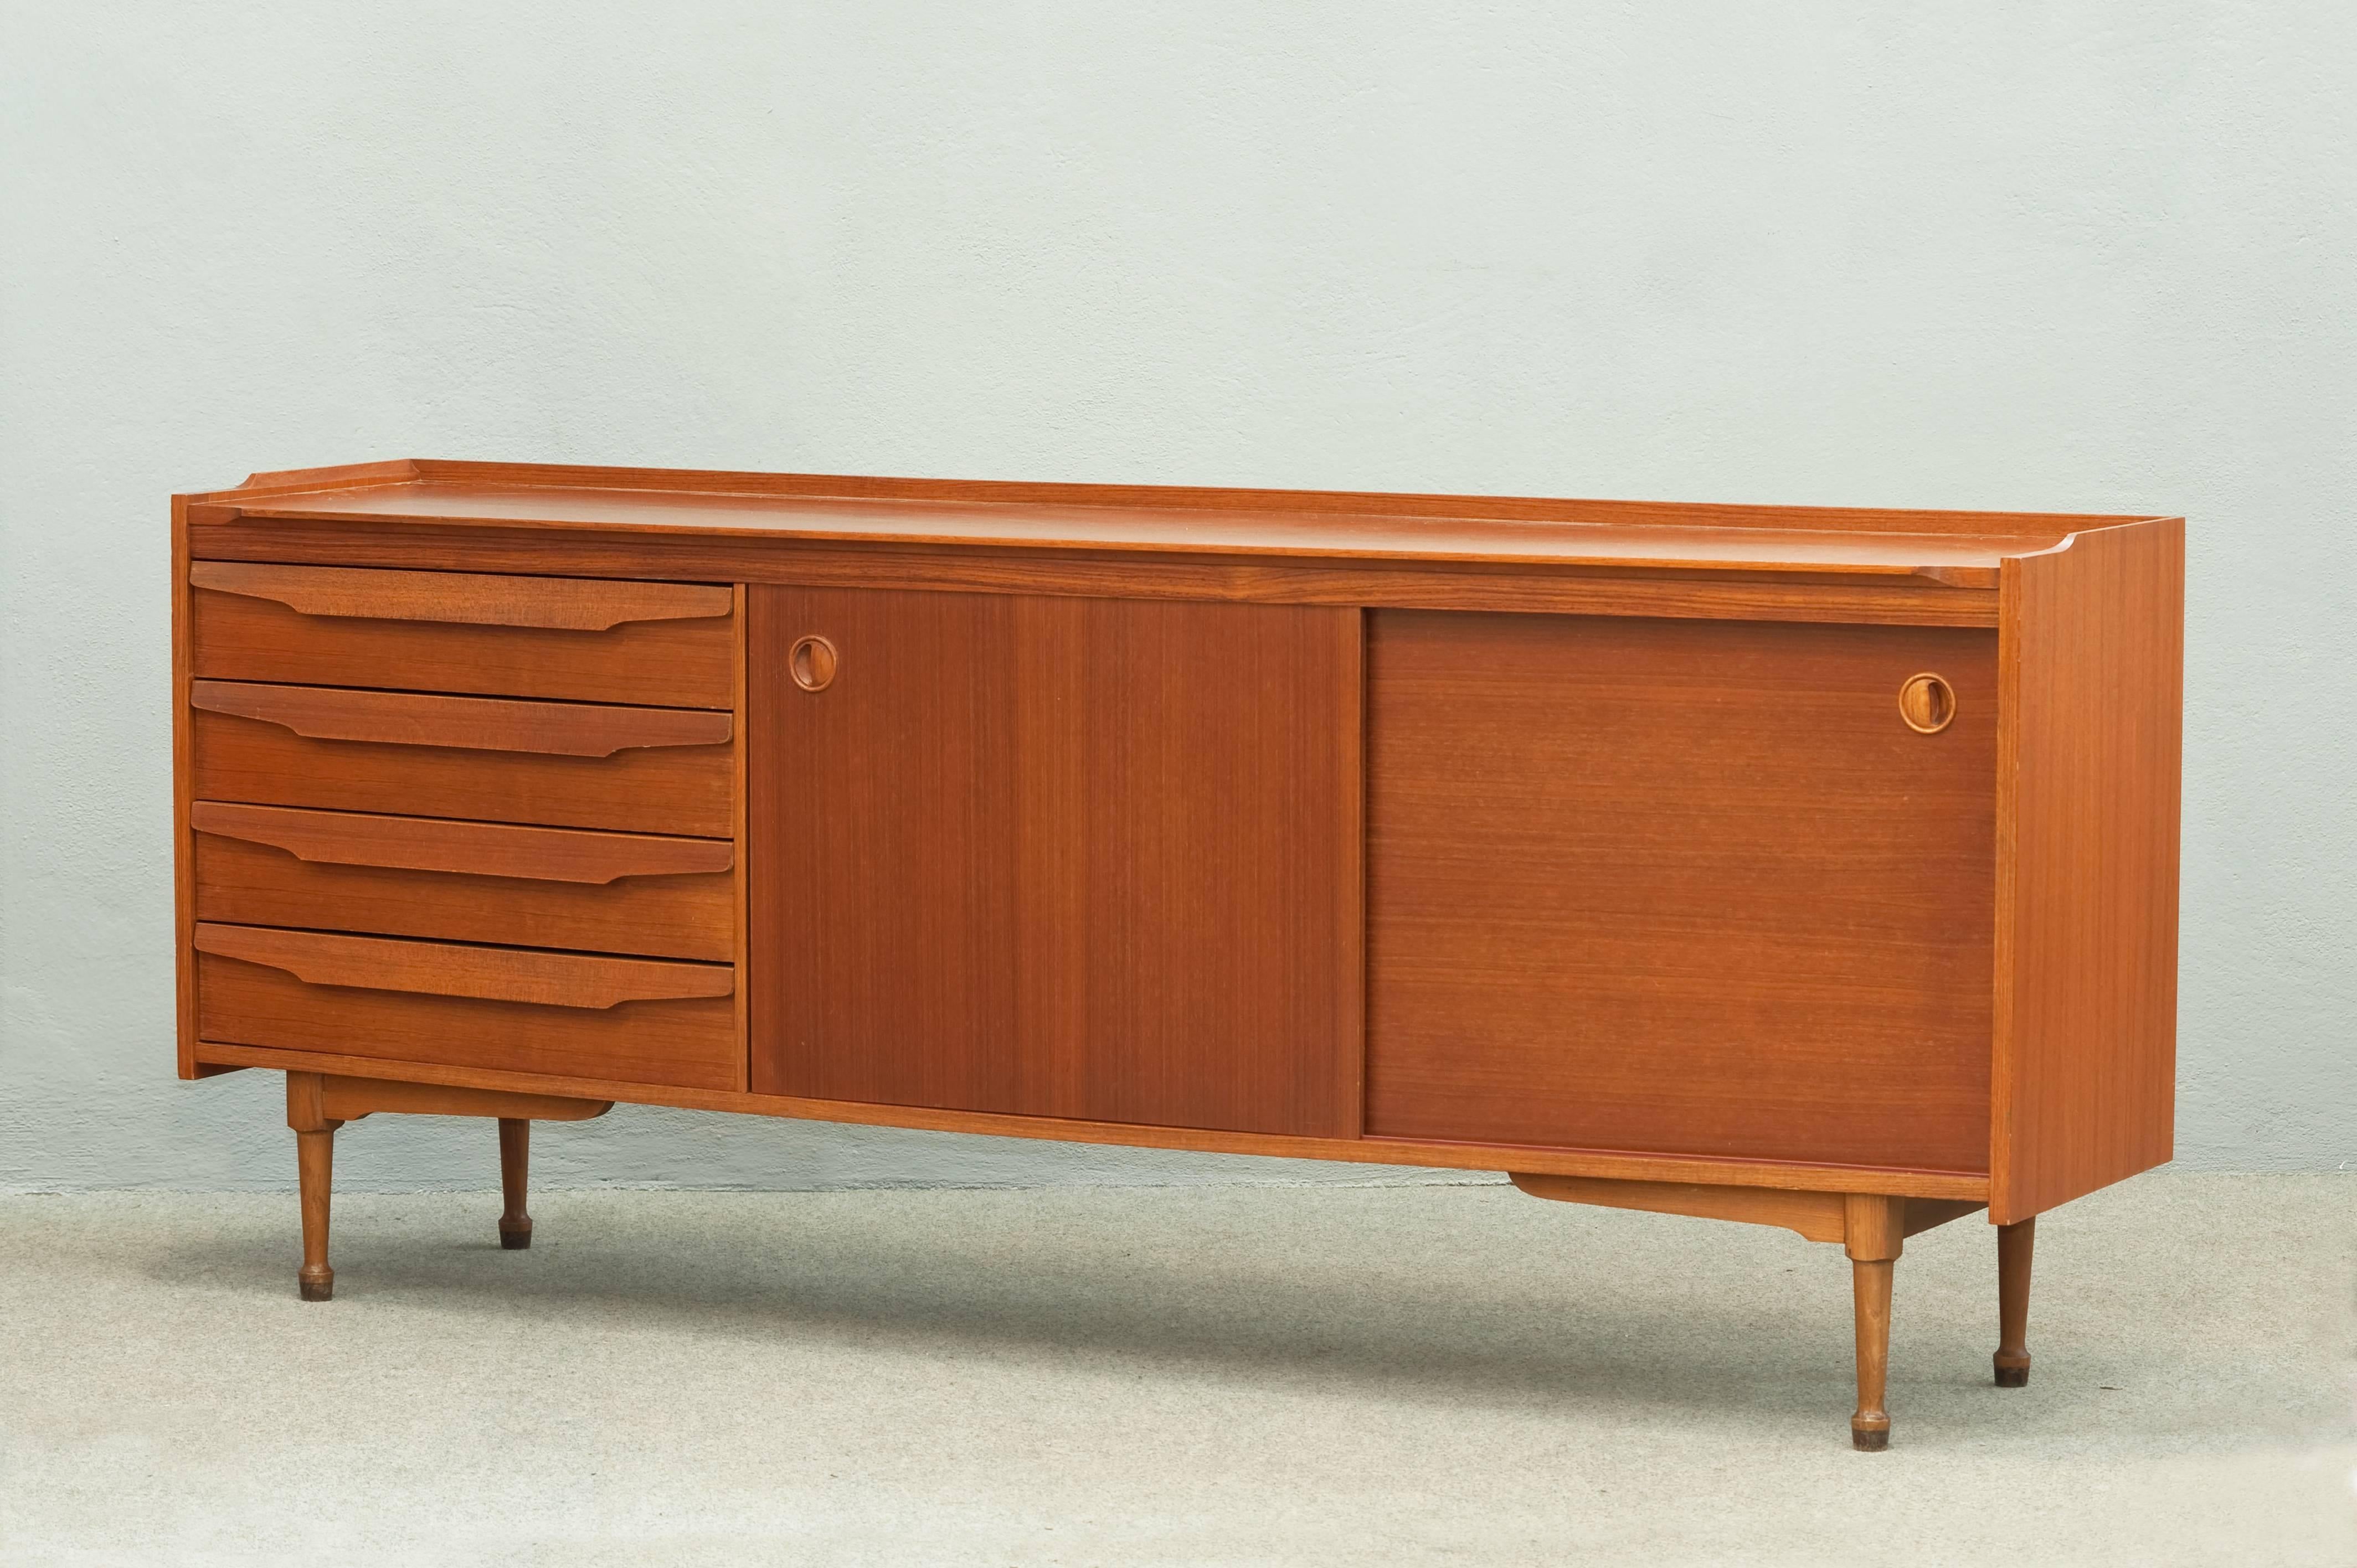 Teak sideboard with two sliding doors and four drawers.